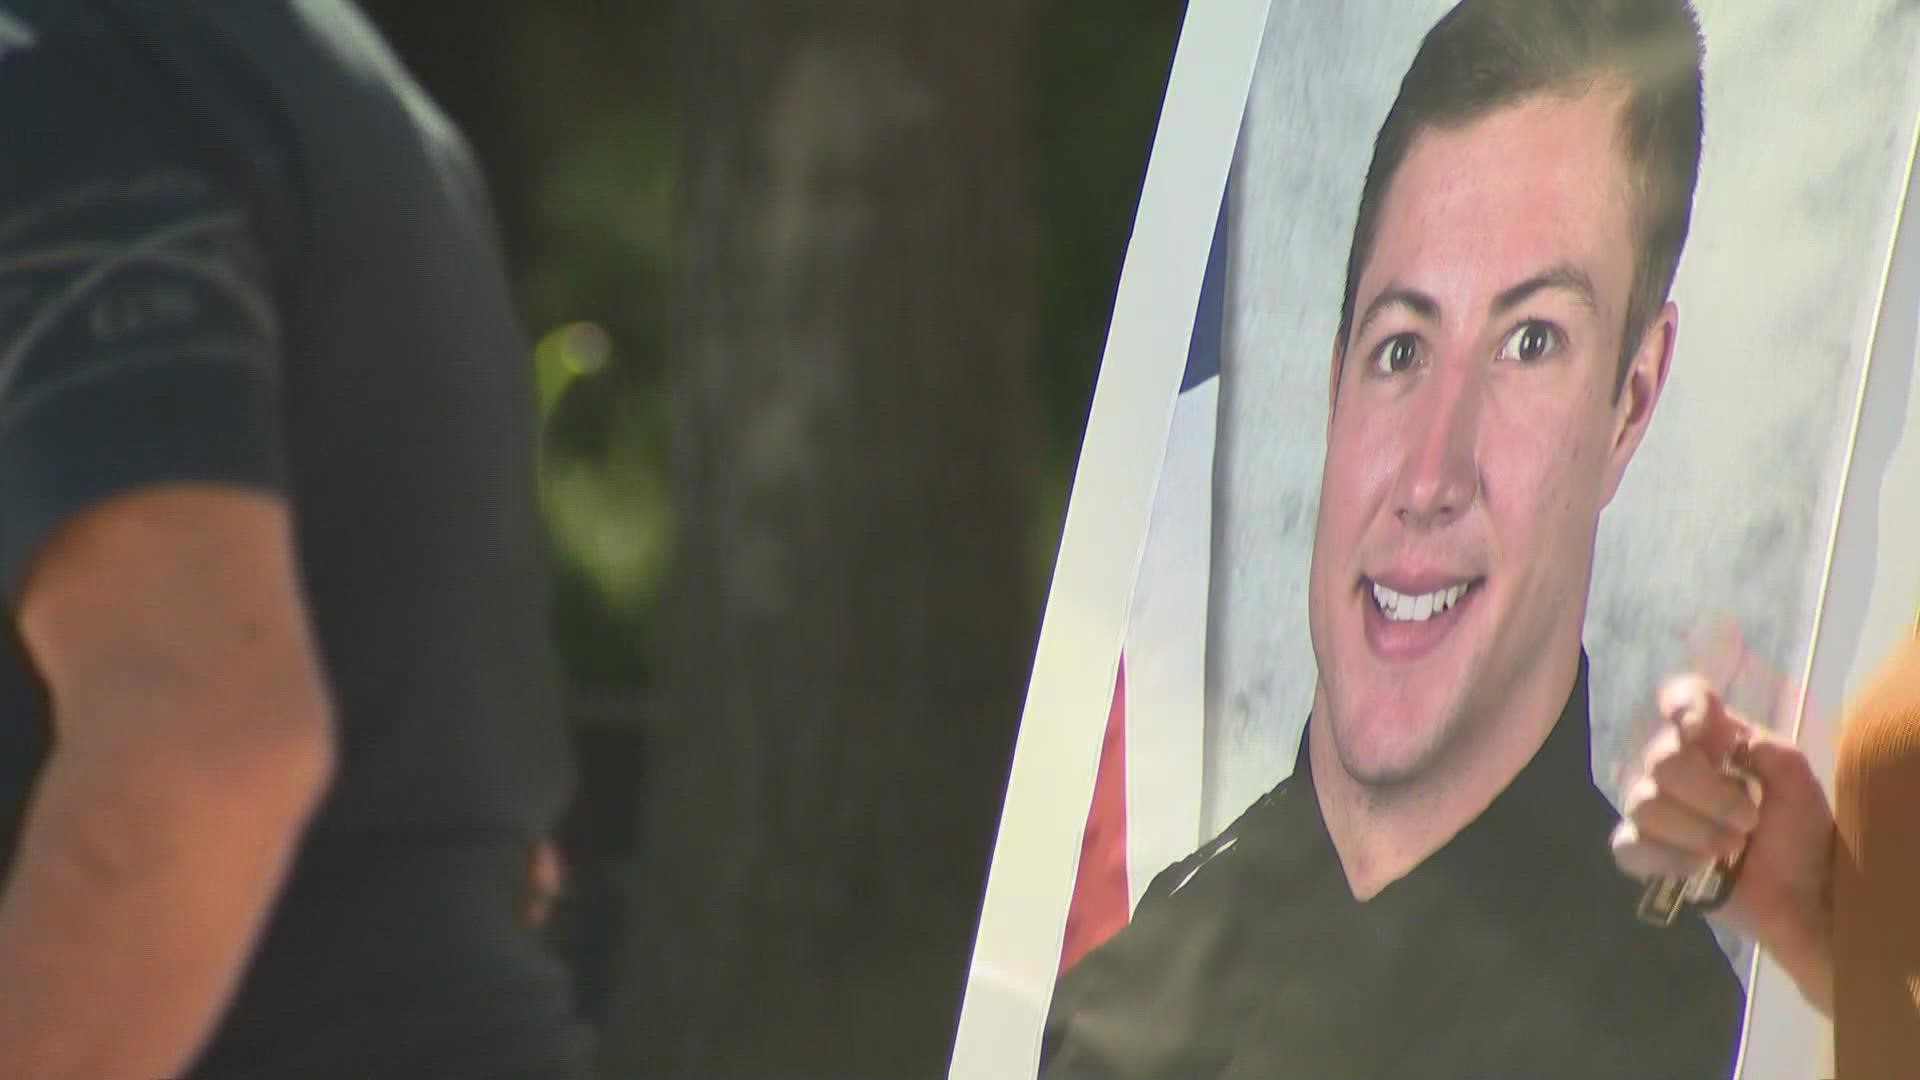 Officer Dillon Vakoff was fatally shot early Sunday. The suspect and a woman were also shot and are expected to survive, police said.